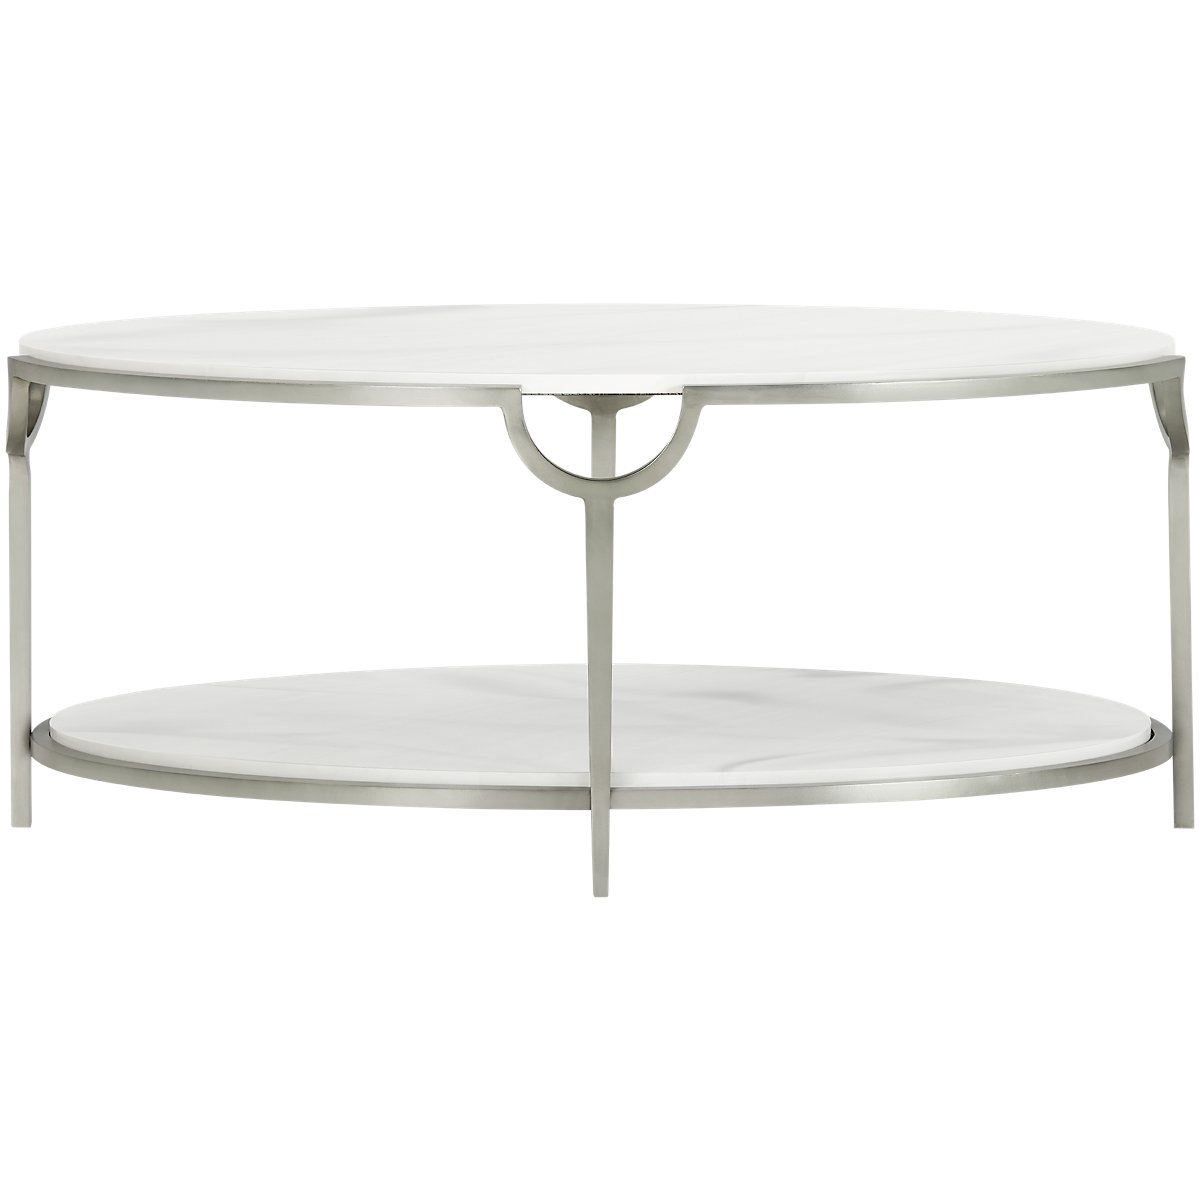 City Furniture: Morello Marble Oval Coffee Table